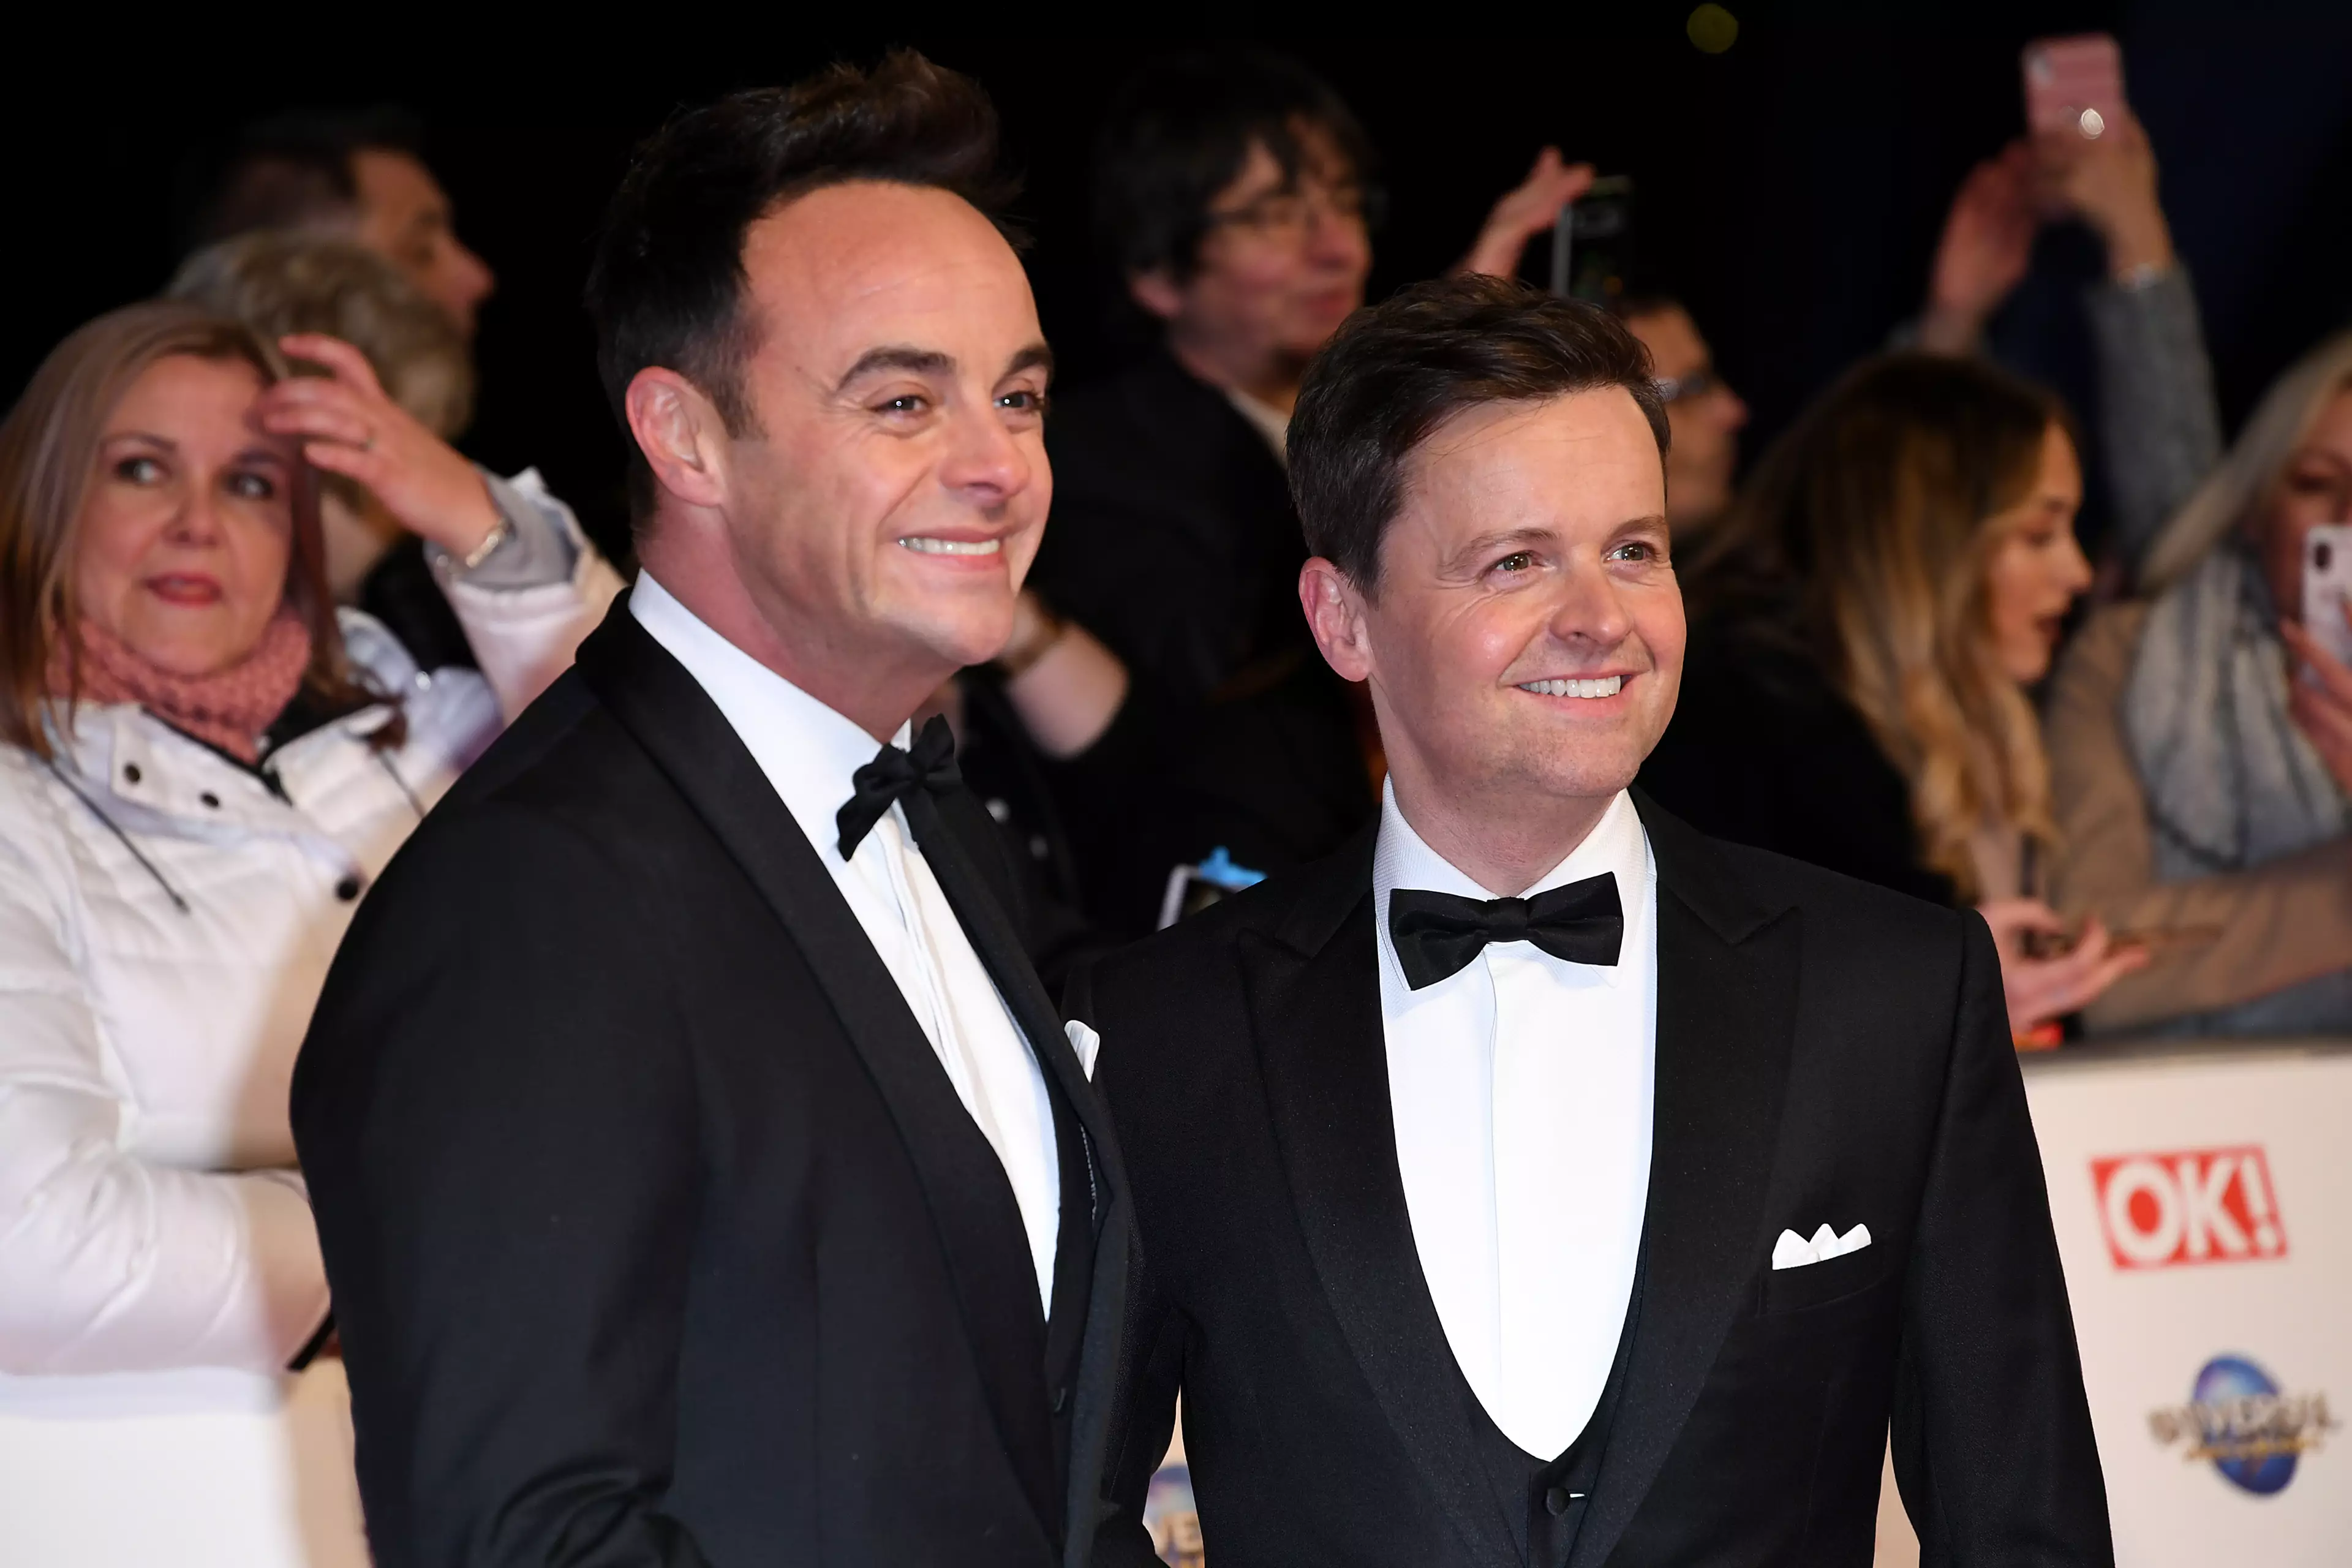 Ant and Dec will host Saturday Night Takeaway from their homes tonight.